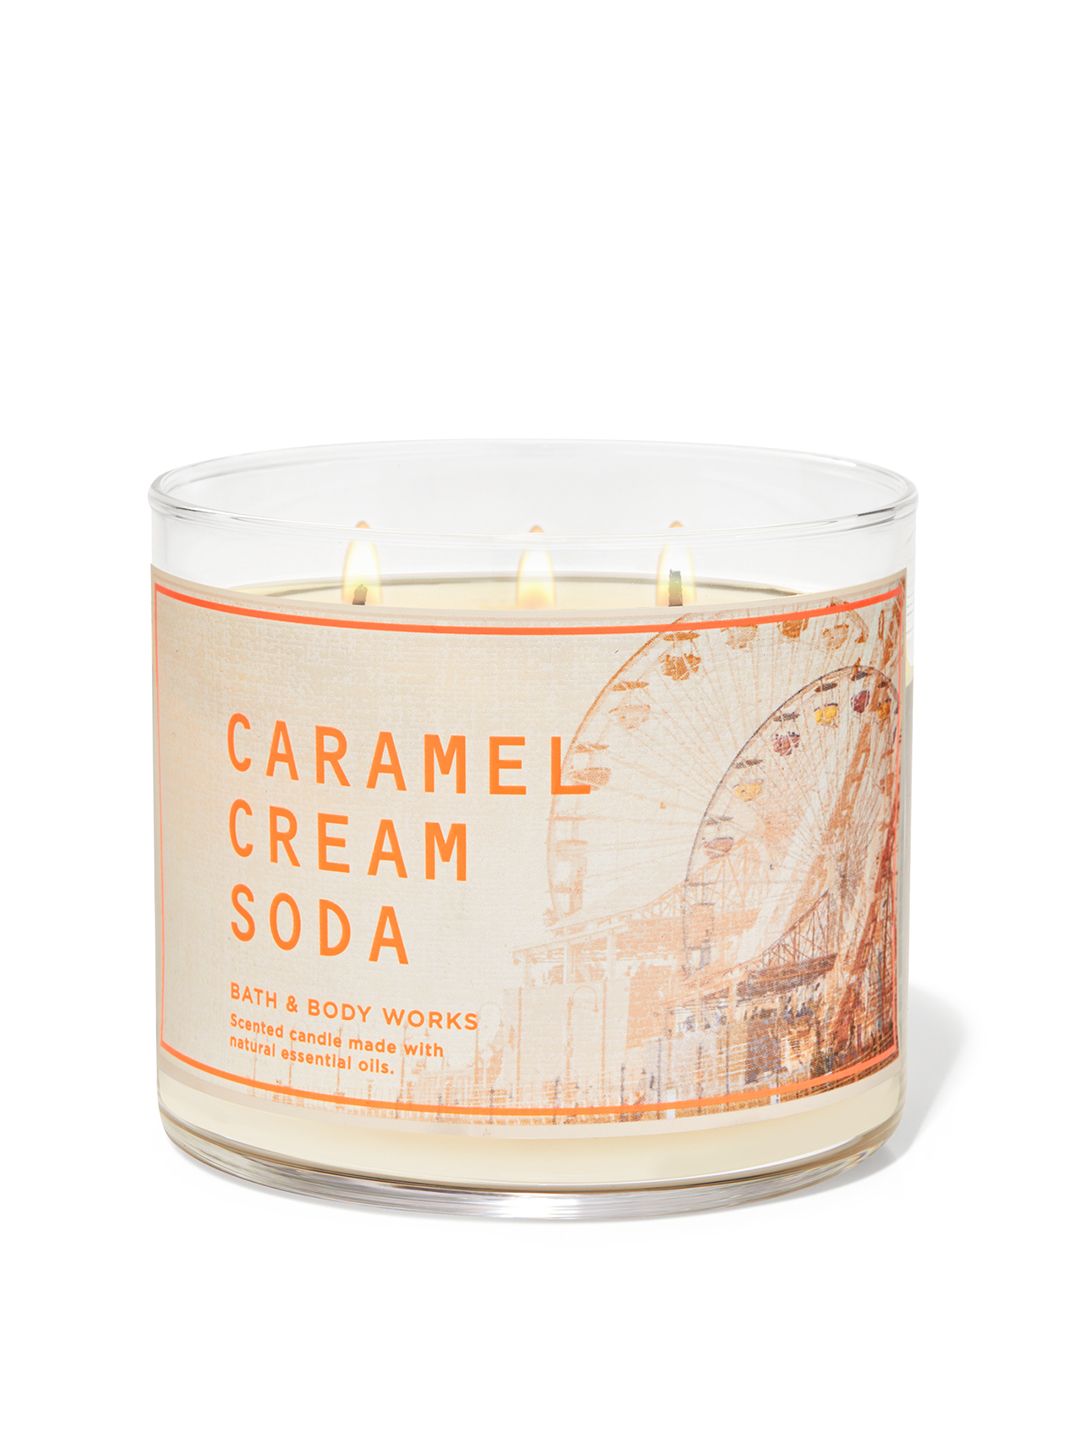 Bath & Body Works Caramel Cream Soda 3-Wick Scented Candle with Essential Oils - 411g Price in India